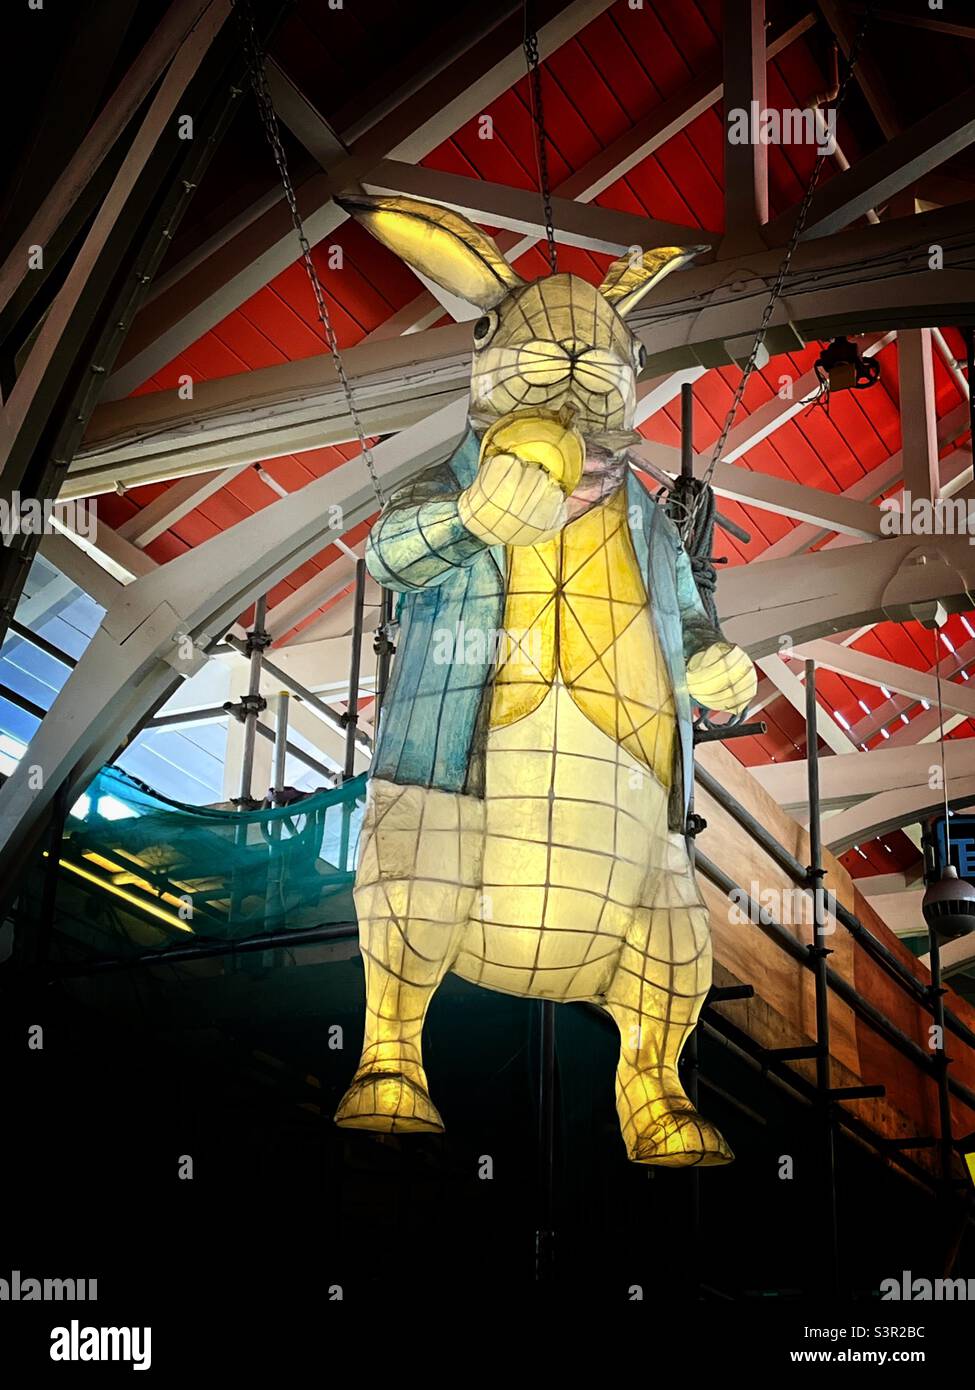 A lit sculpture of the White Rabbit from Lewis Carroll’s book Alice in Wonderland’ hanging in the Covered Market at Oxford, UK. Stock Photo